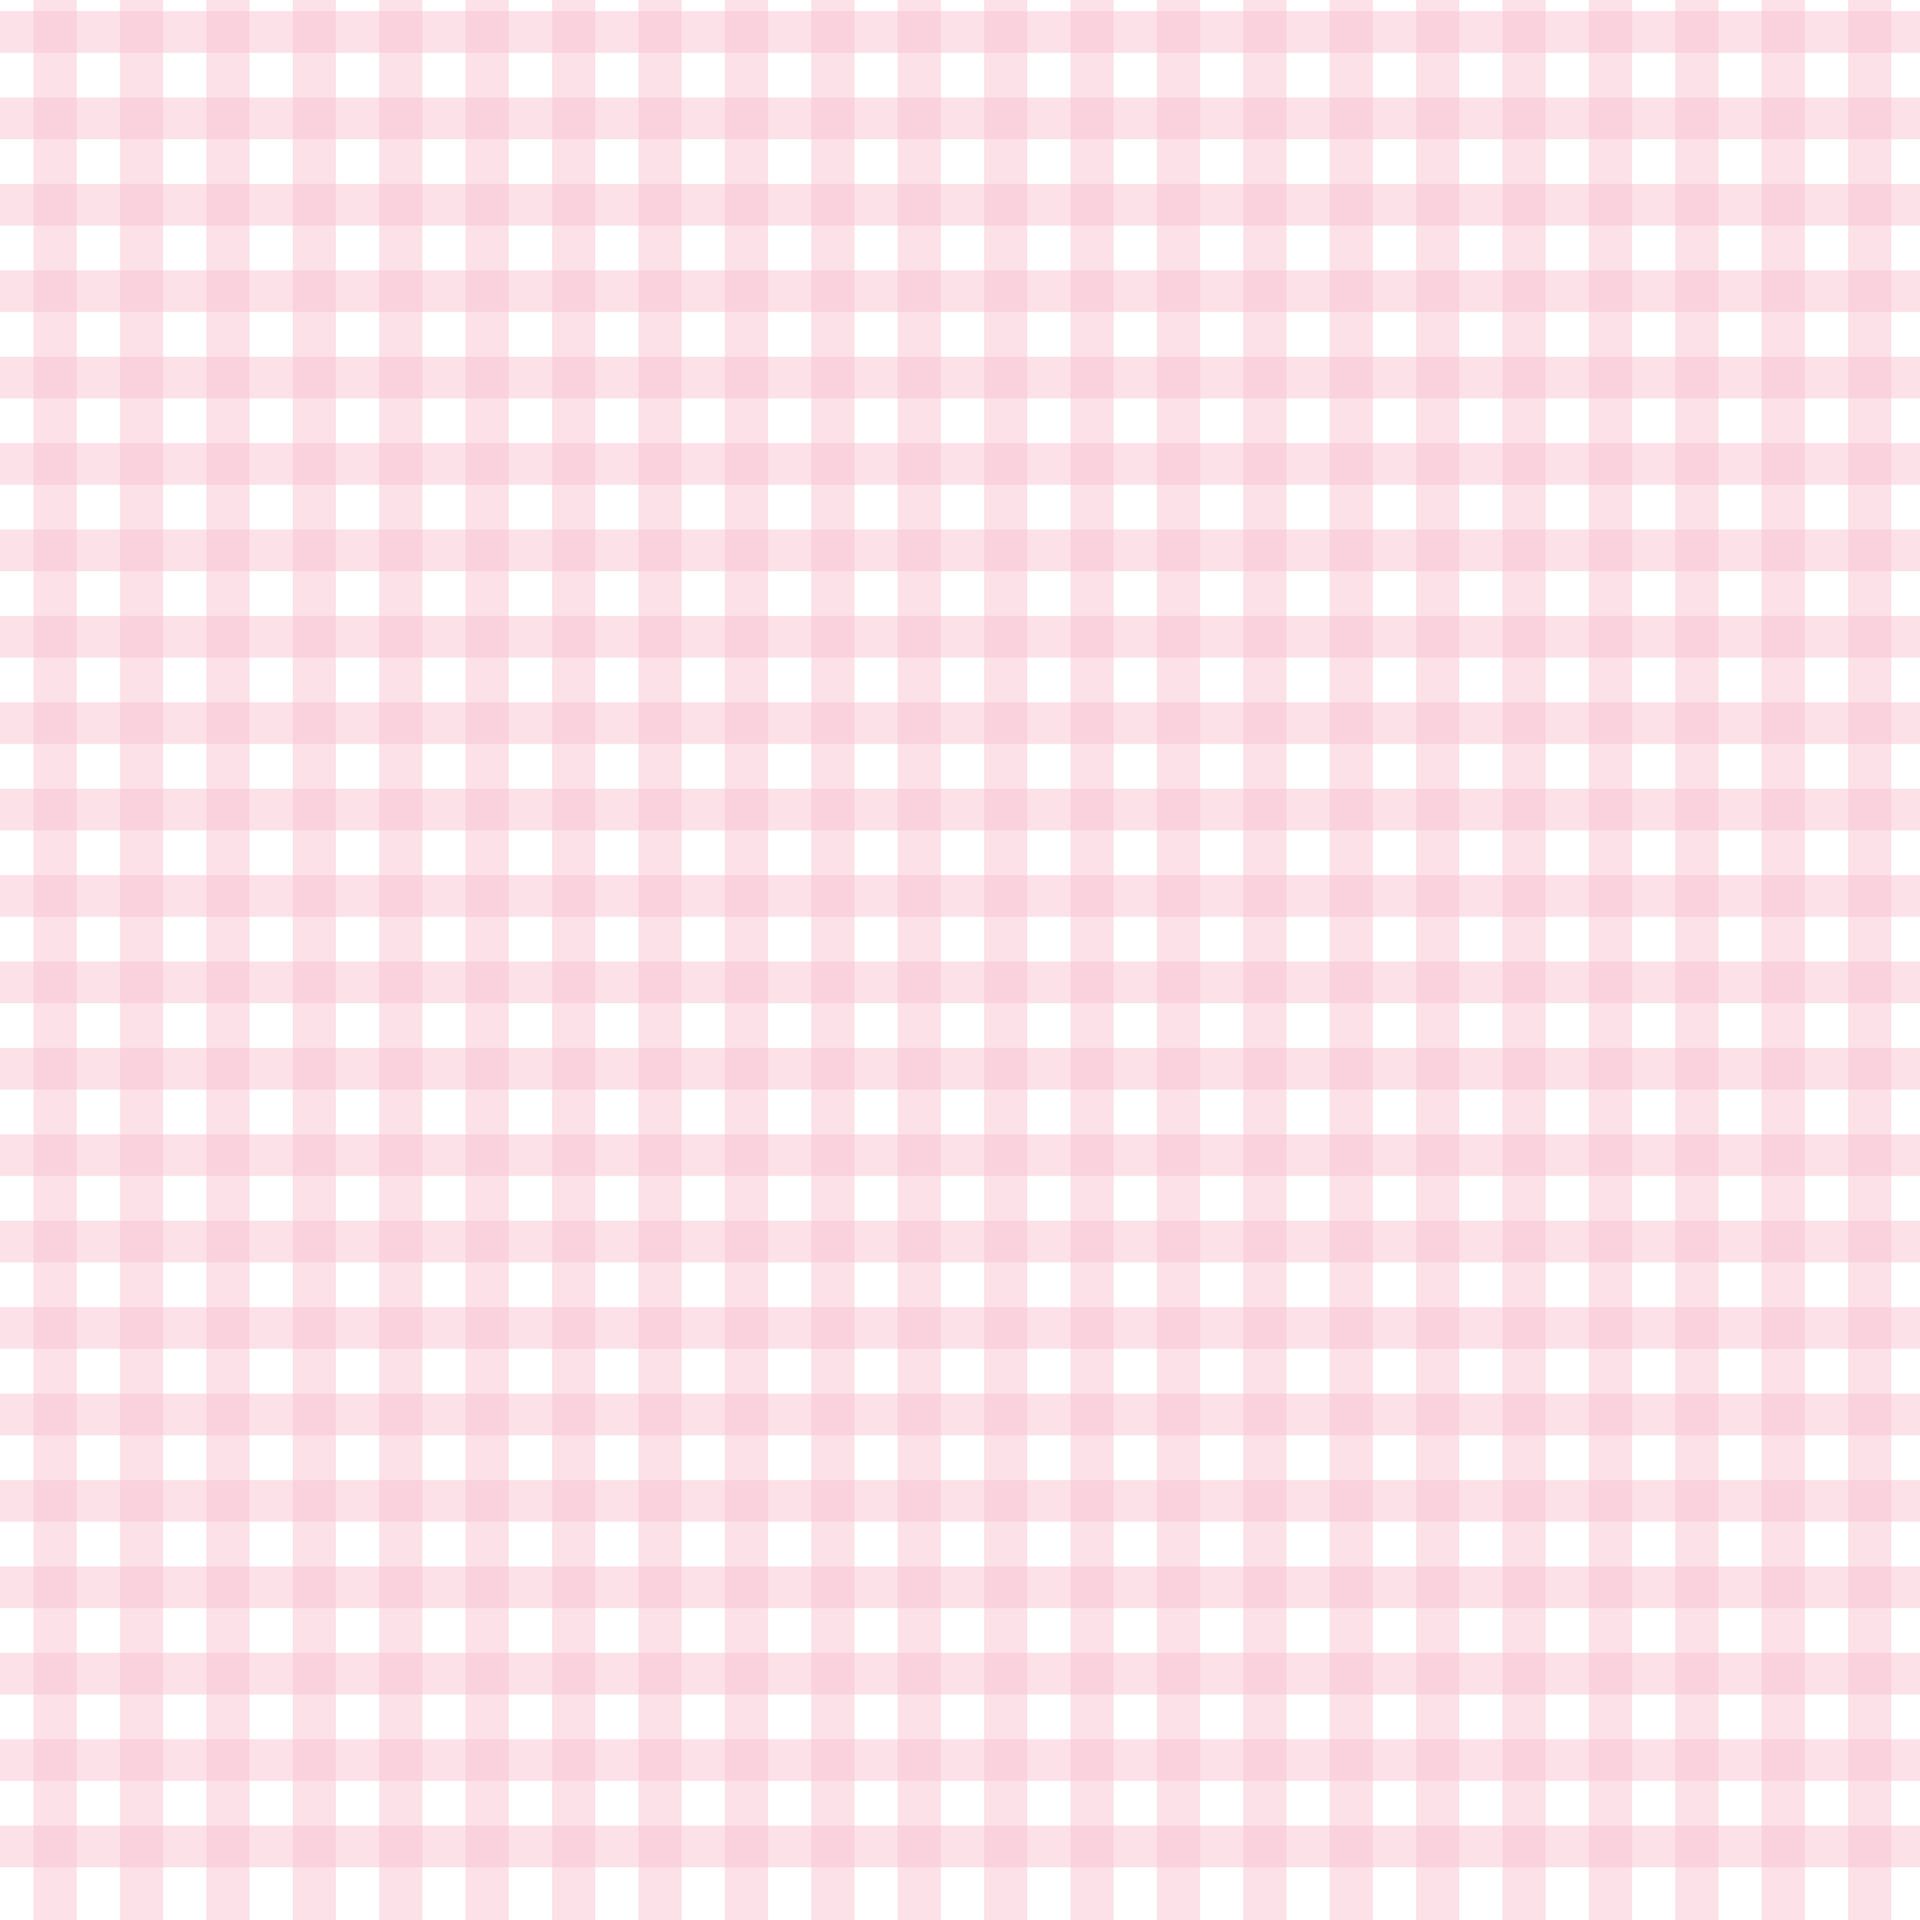 Checkered tile pattern or pink and white wallpaper